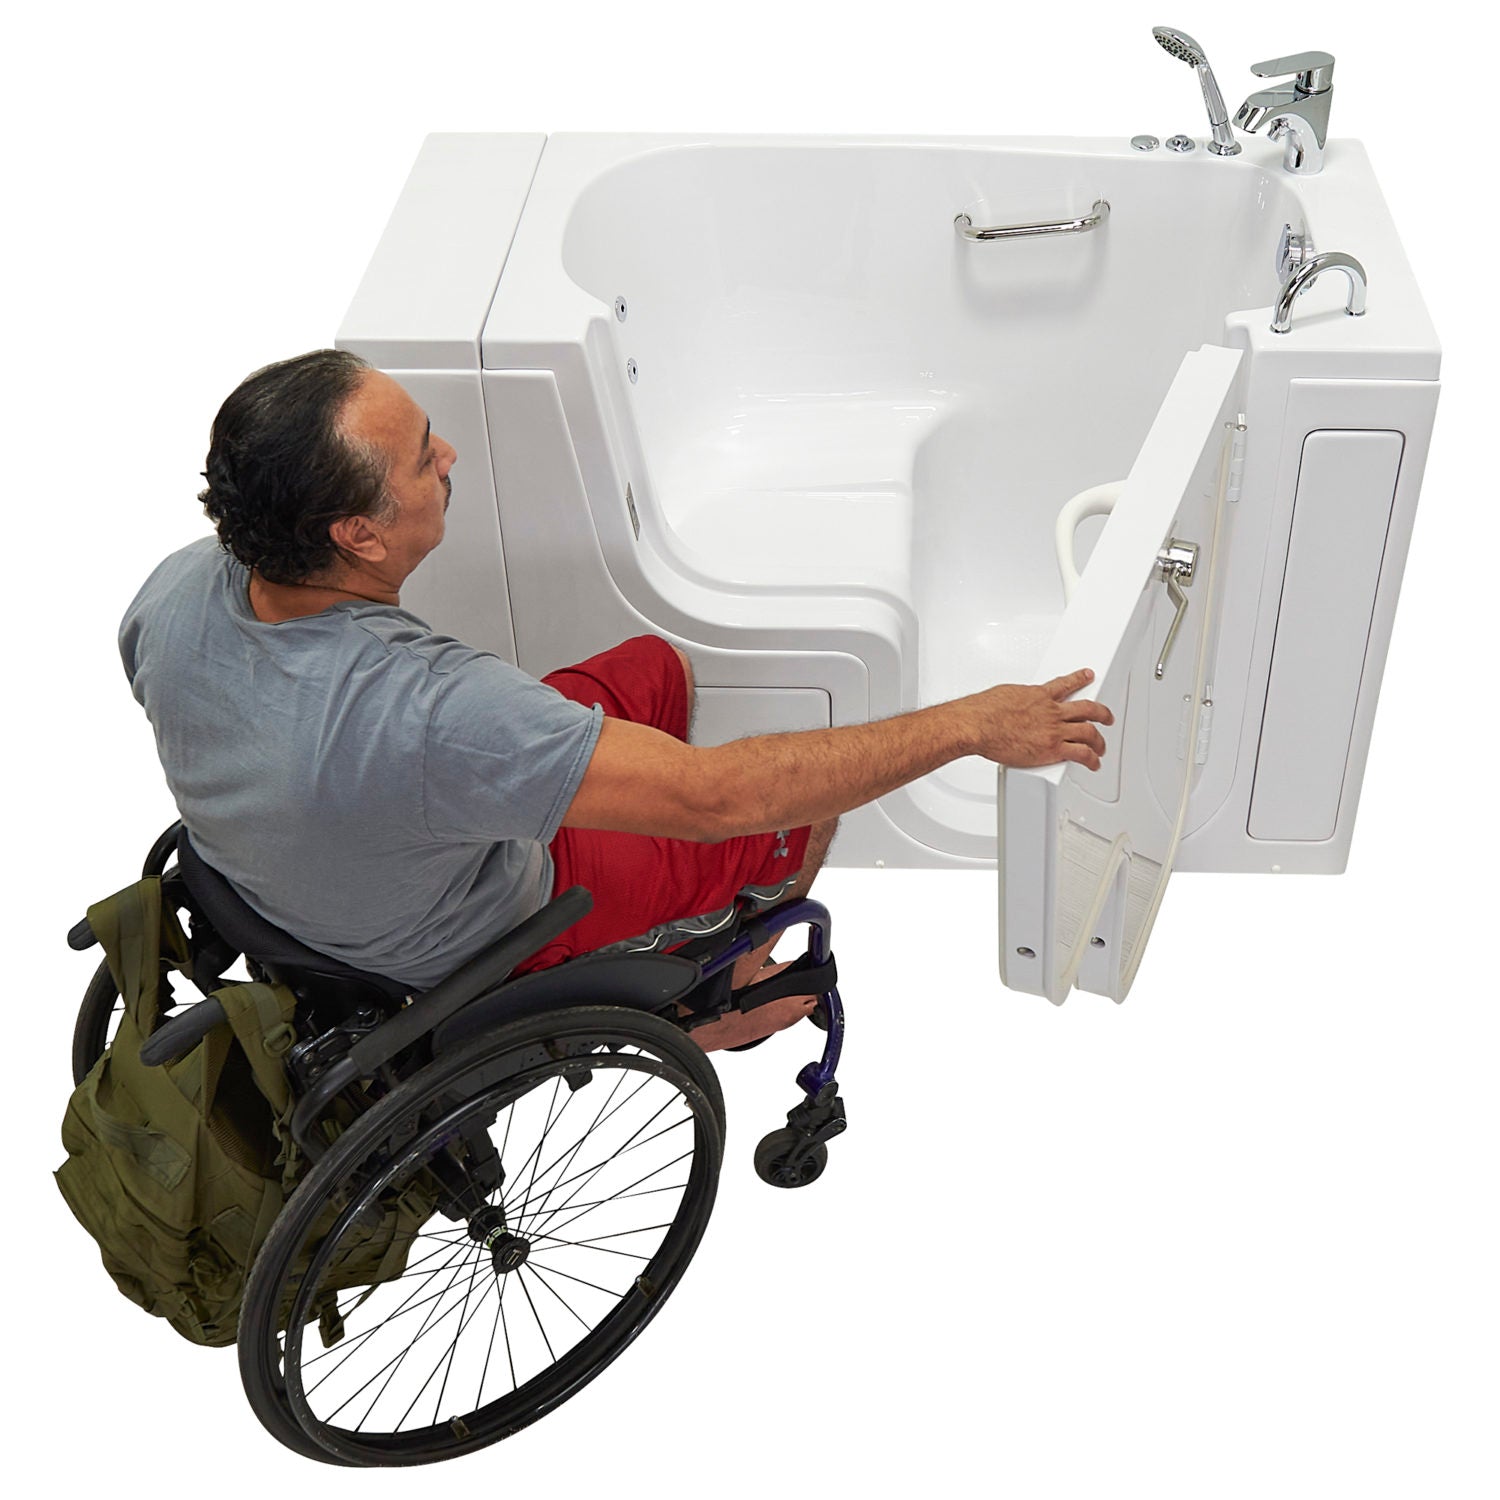 Ella Wheelchair Transfer 26"x52" Acrylic Hydro Massage Walk-In Bathtub with Left side wheelchair Outward Swing Door, 2 Piece Fast Fill Faucet, 2" Dual Drain - with with 2 stainless steel grab bars - L-shape wheelchair, 2-latch door lock system concealed with an acrylic decorative cover, Cast acrylic high gloss finish, fiberglass gel-coat reinforced, Rugged stainless steel frame Walk-In Bathtub with 1 man sitting in a wheelchair